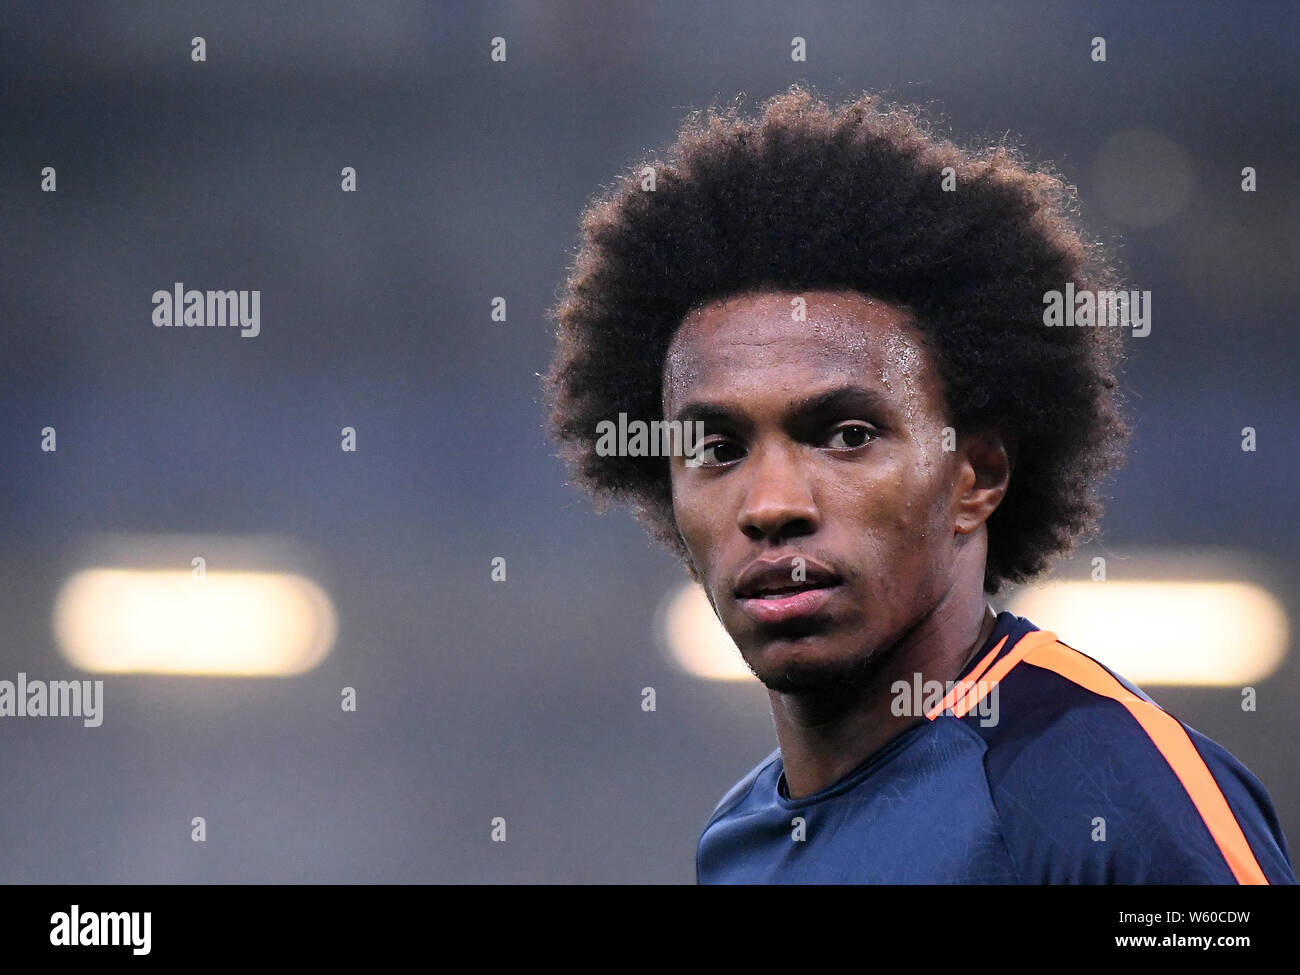 LONDON, ENGLAND - OCTOBER 4, 2018: Willian Borges da Silva of Chelsea pictured prior to the 2018/19 UEFA Europa League Group L game between Chelsea FC (England) and MOL Vidi FC (Hungary) at Stamford Bridge. Stock Photo